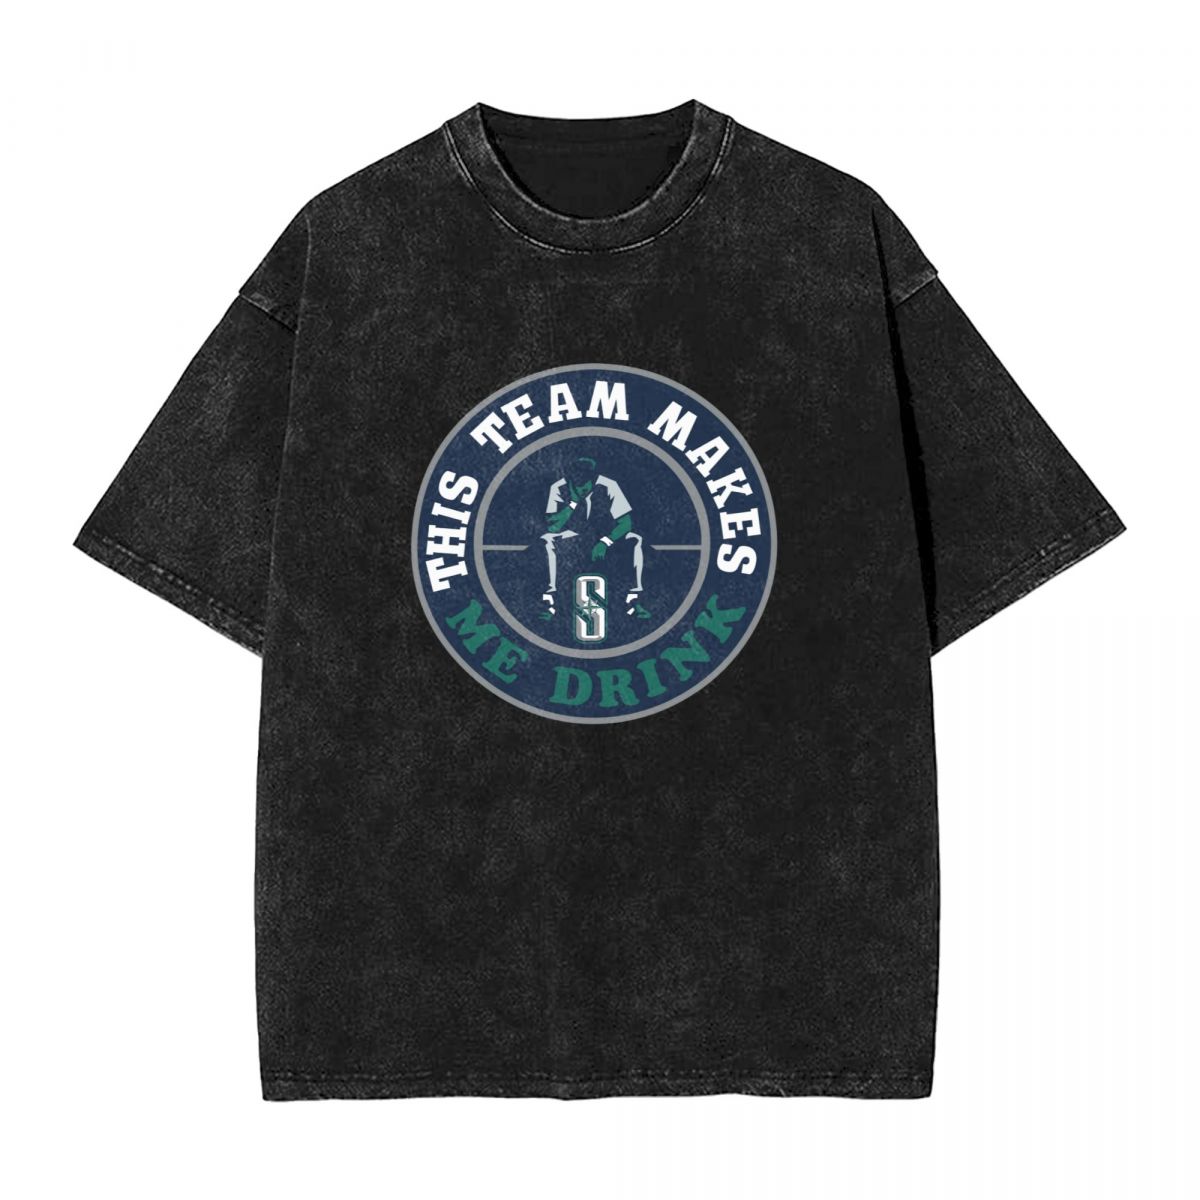 Seattle Mariners This Team Makes Me Drink Vintage Oversized T-Shirt Men's